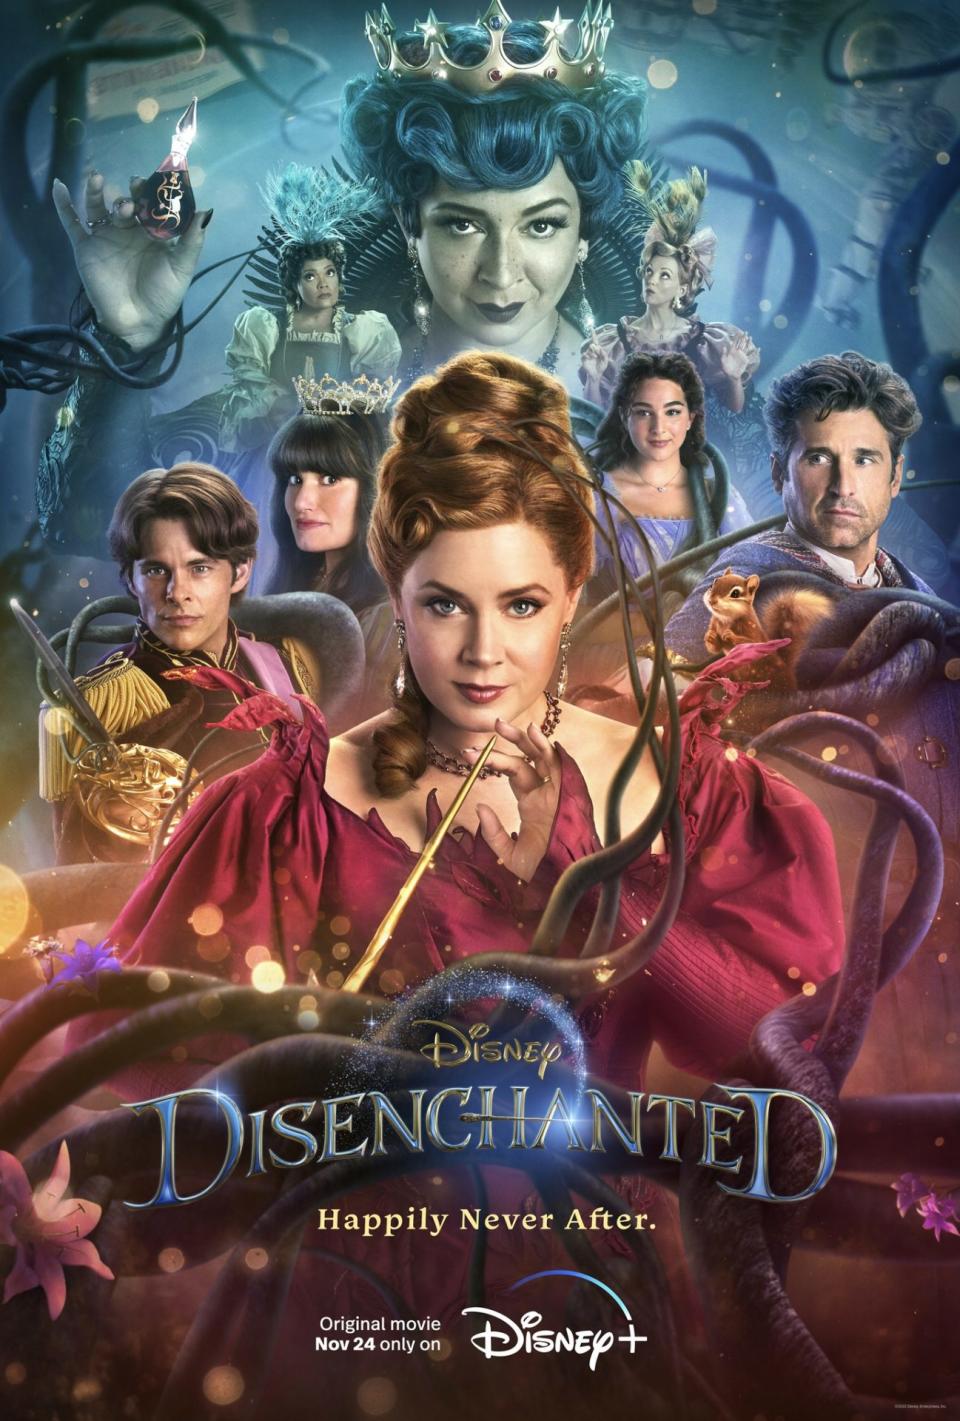 Poster for Disney+ original movie Disenchanted, a sequel to Enchanted.